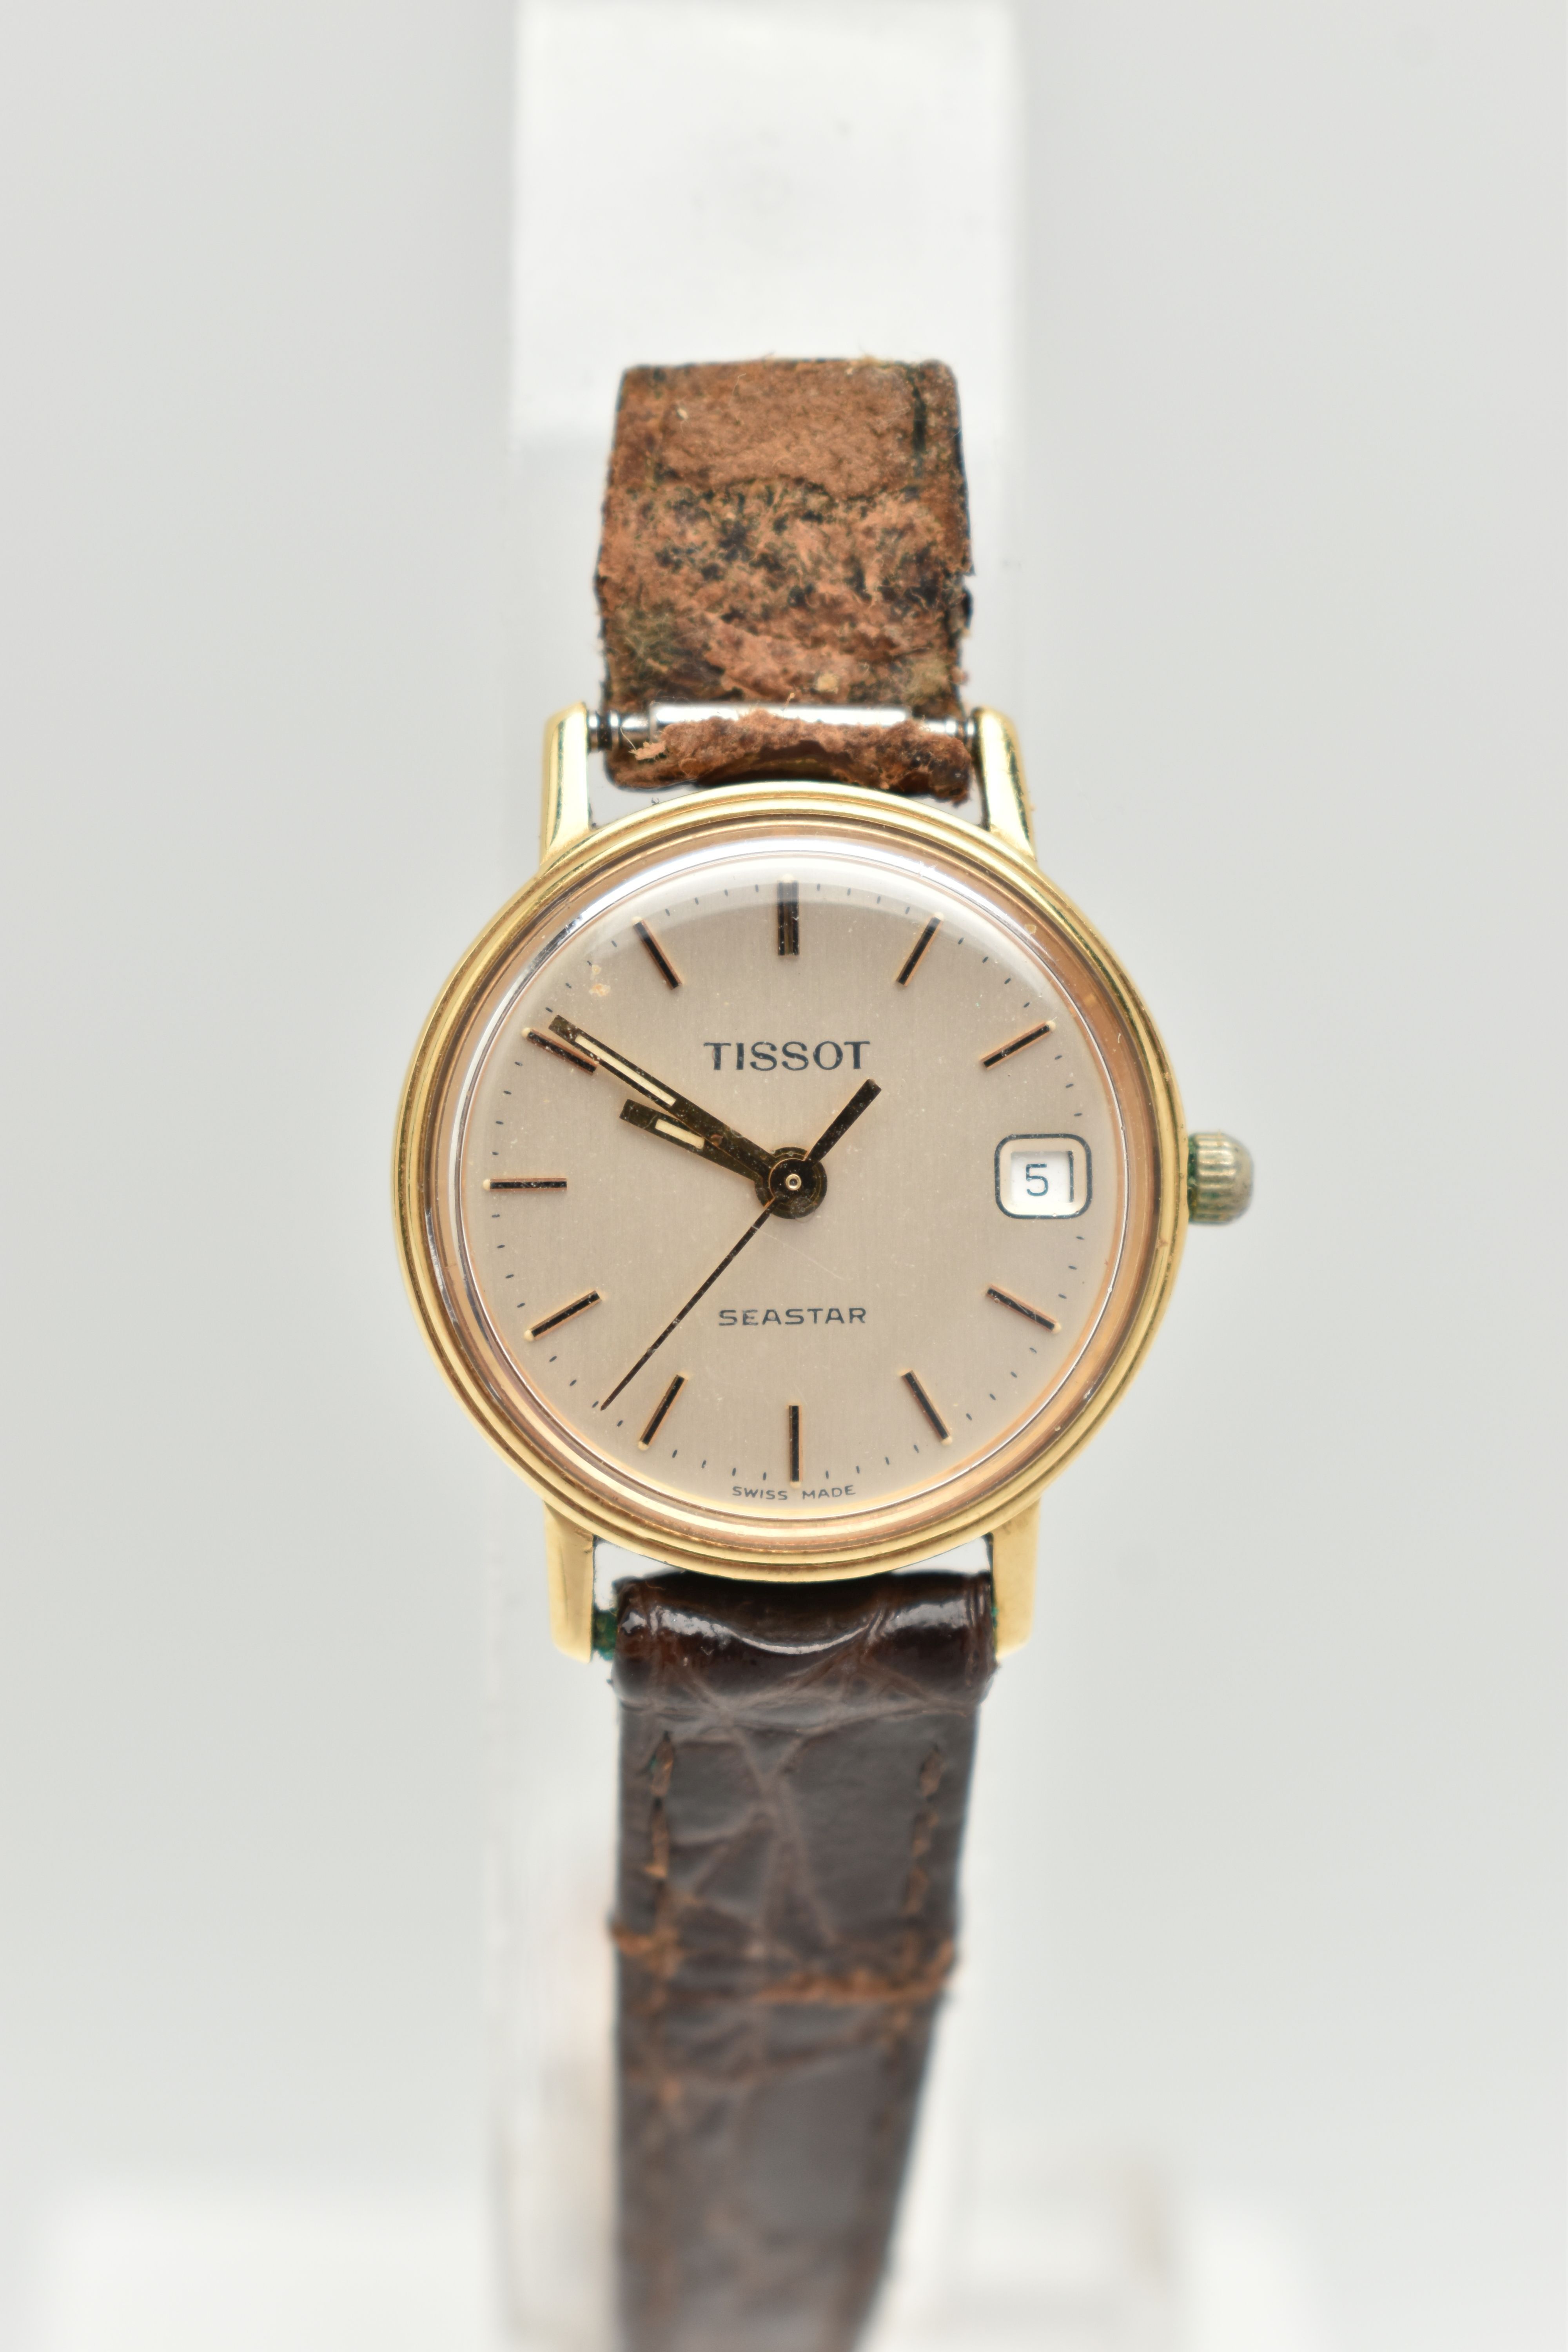 A LADIES 'TISSOT' WRISTWATCH, round gold tone dial signed 'Tissot Seastar', baton markers, date